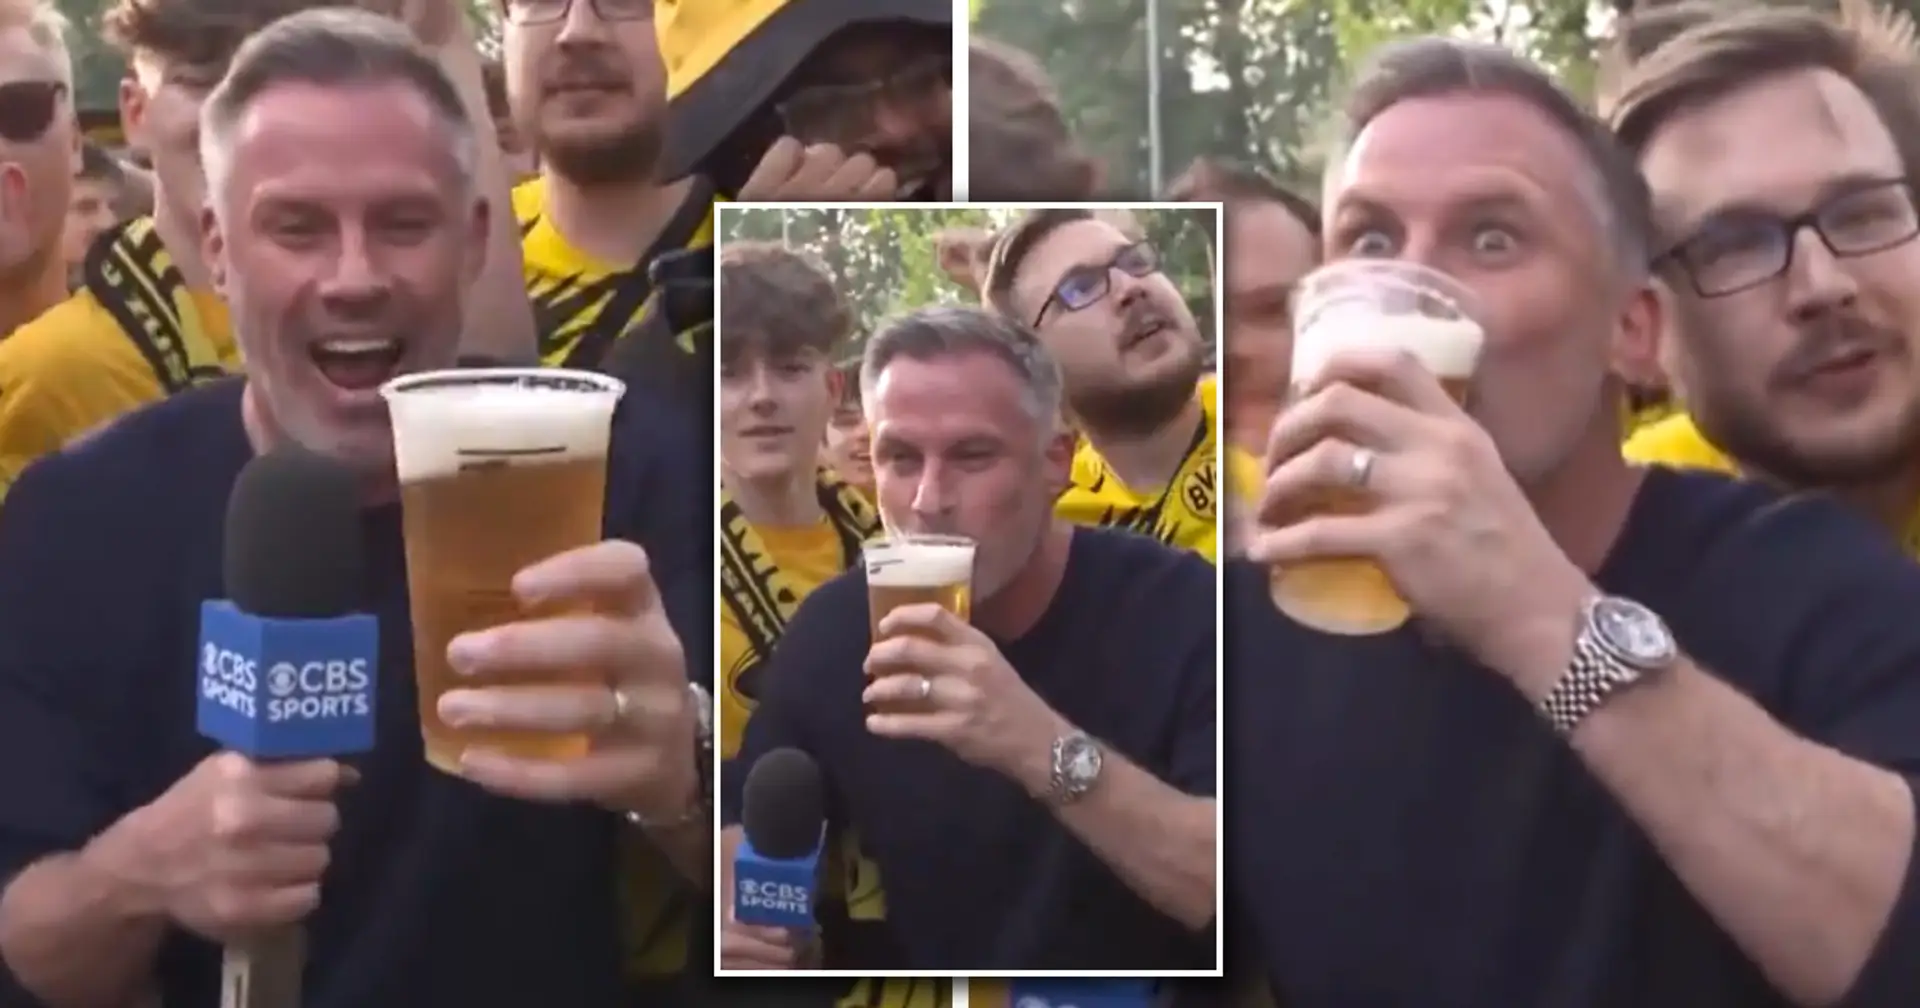 'A drink to cool me down': Carragher chugs beer on live TV cheered by Dortmund fans